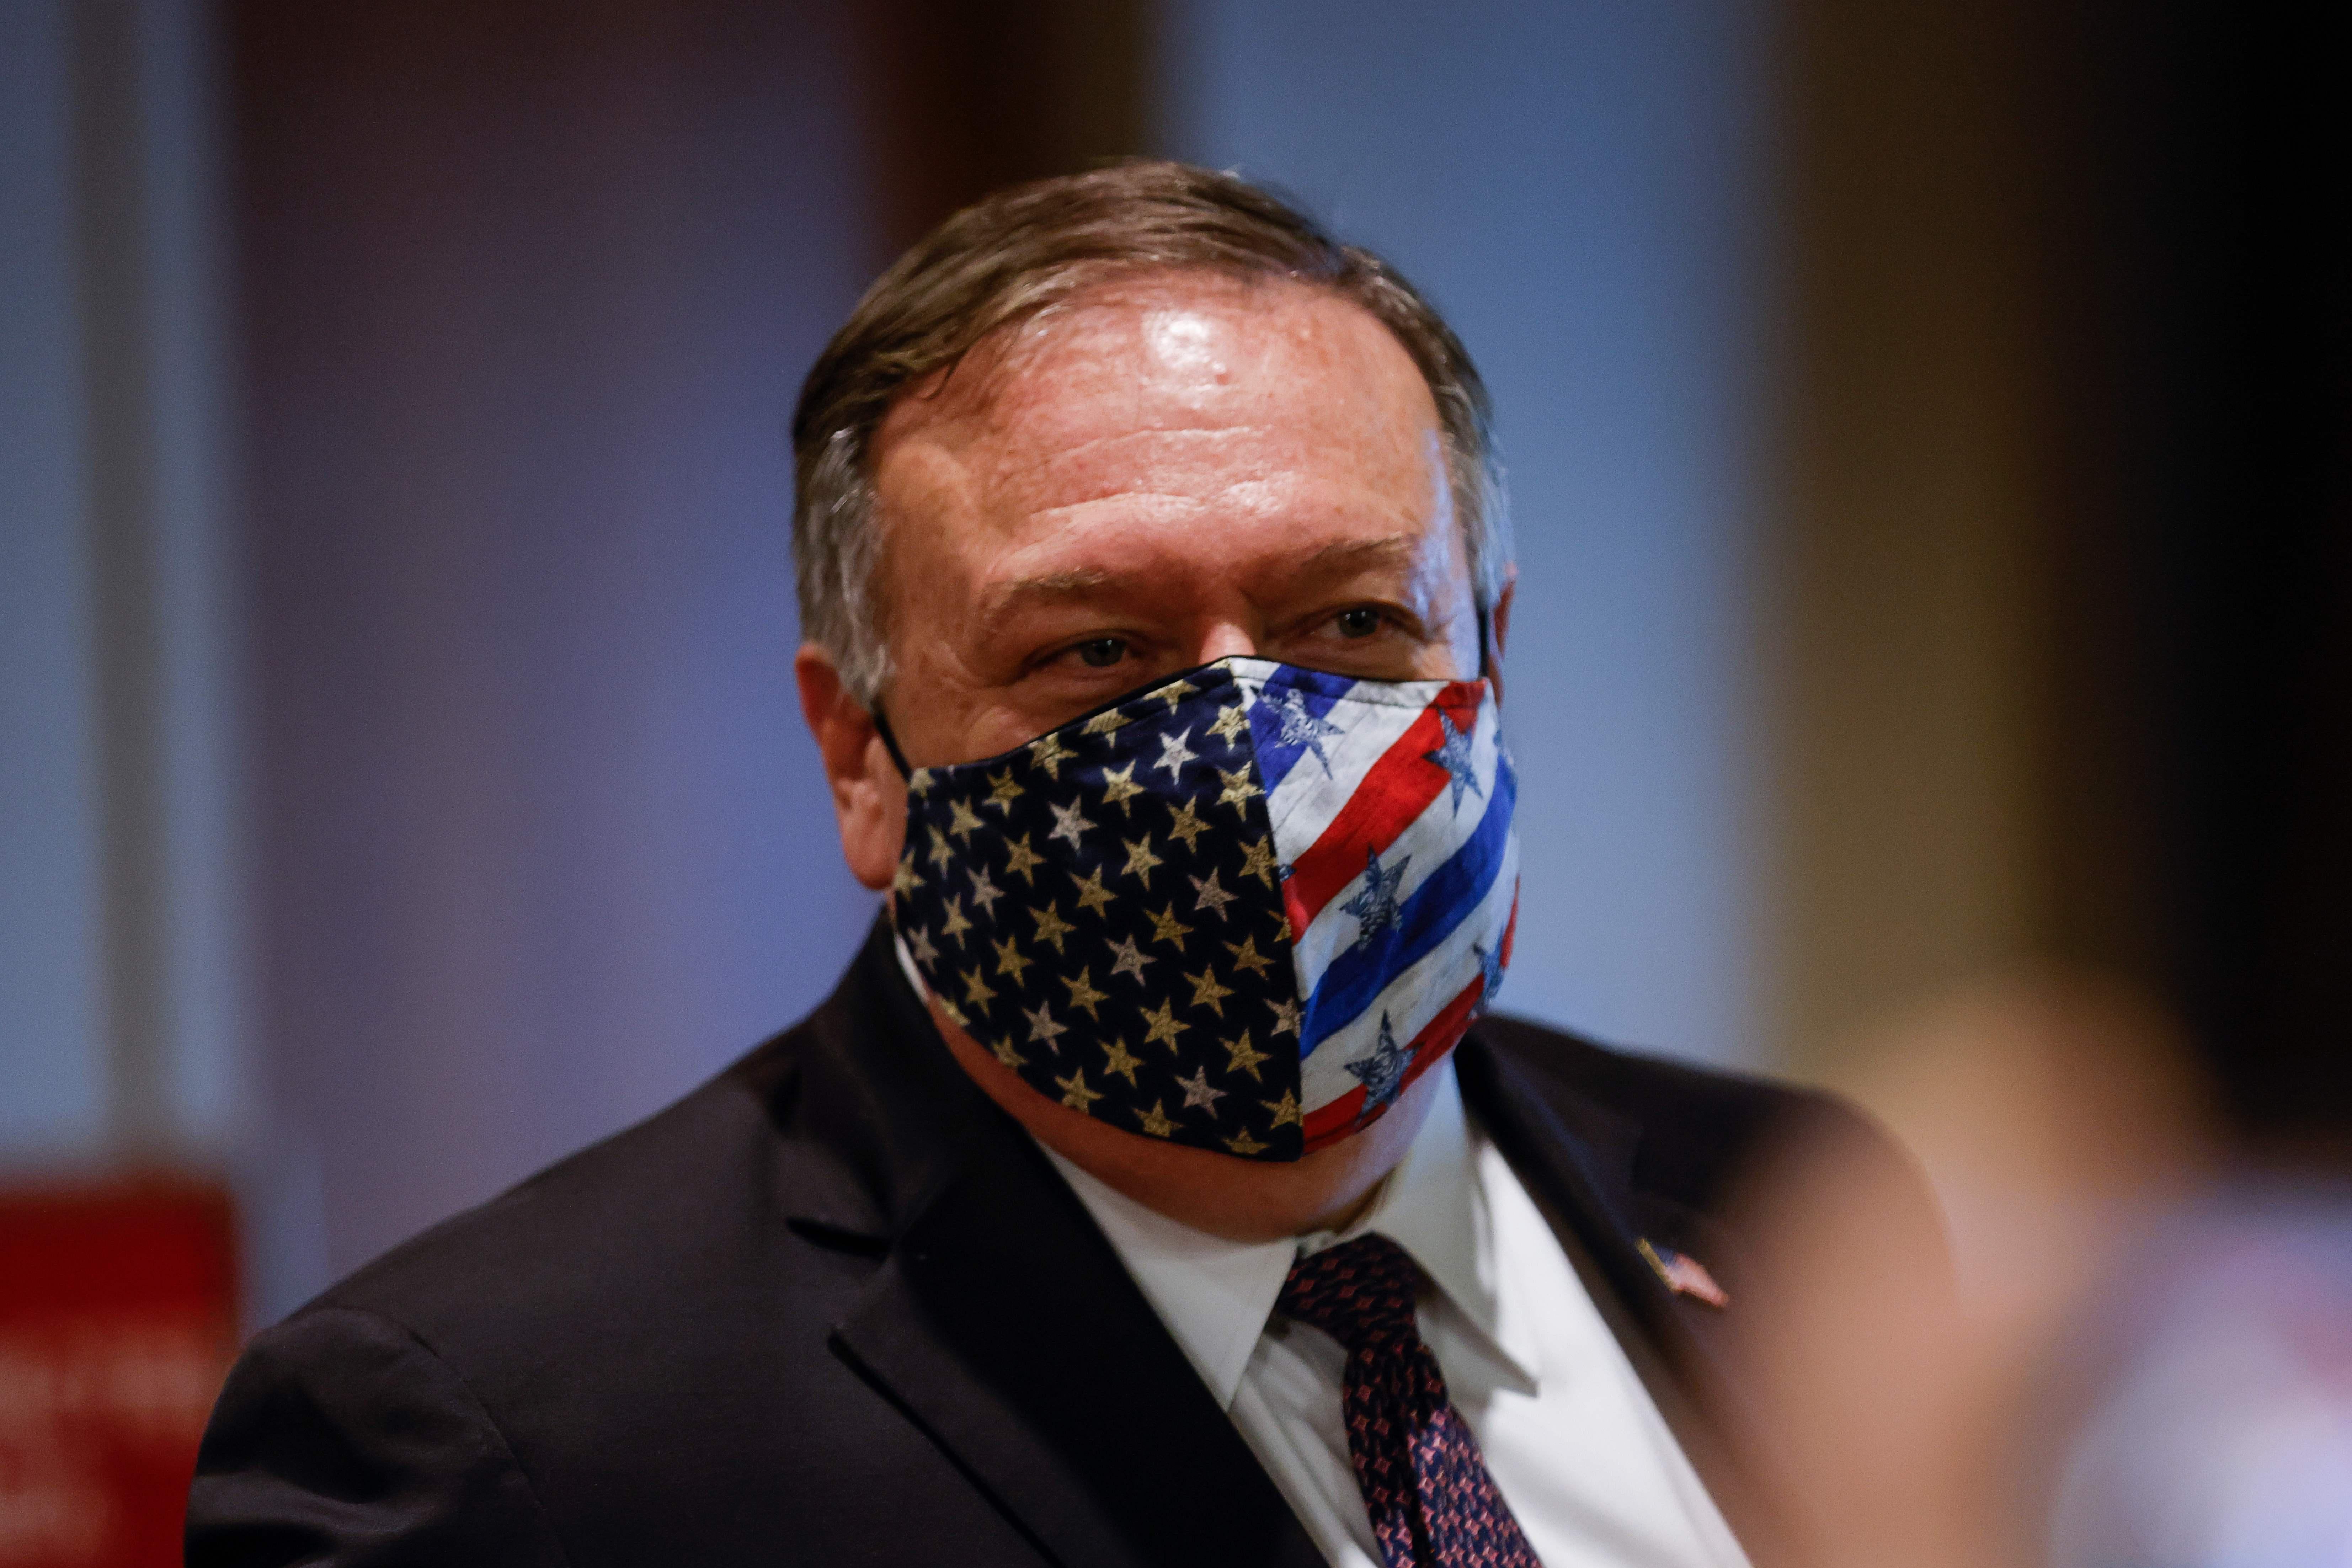 Pompeo wearing an American flag mask.